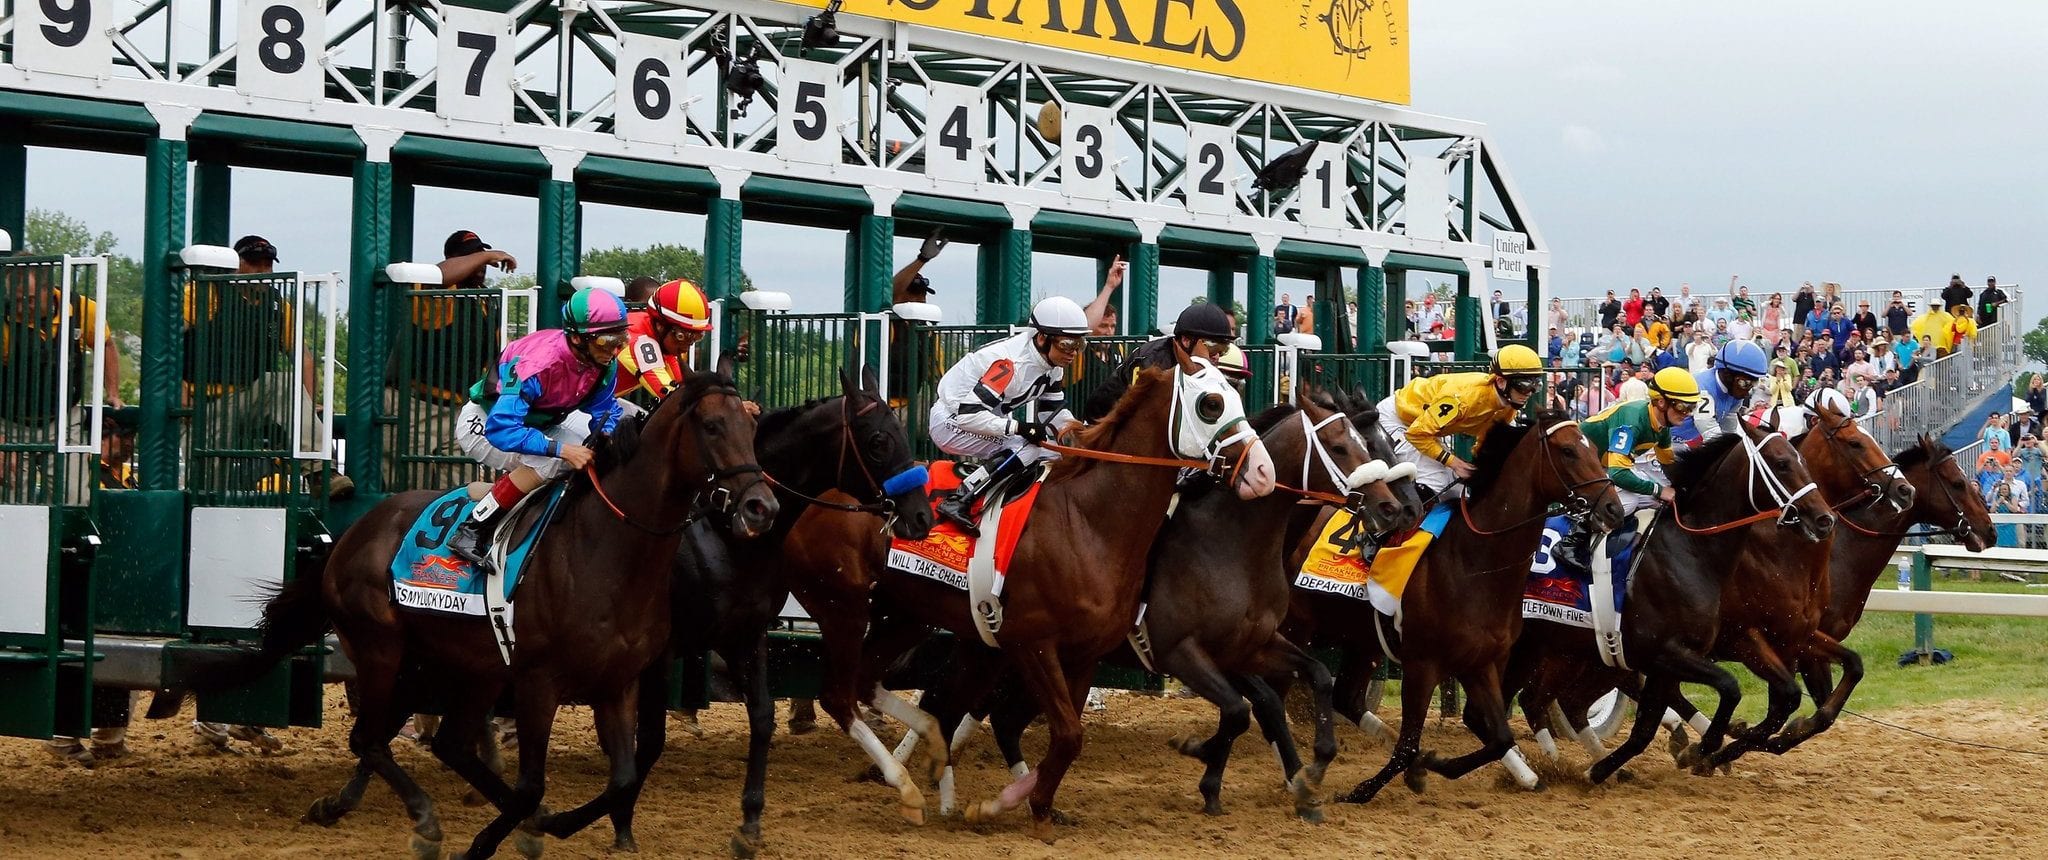 Preakness Stakes Bitcoin Betting